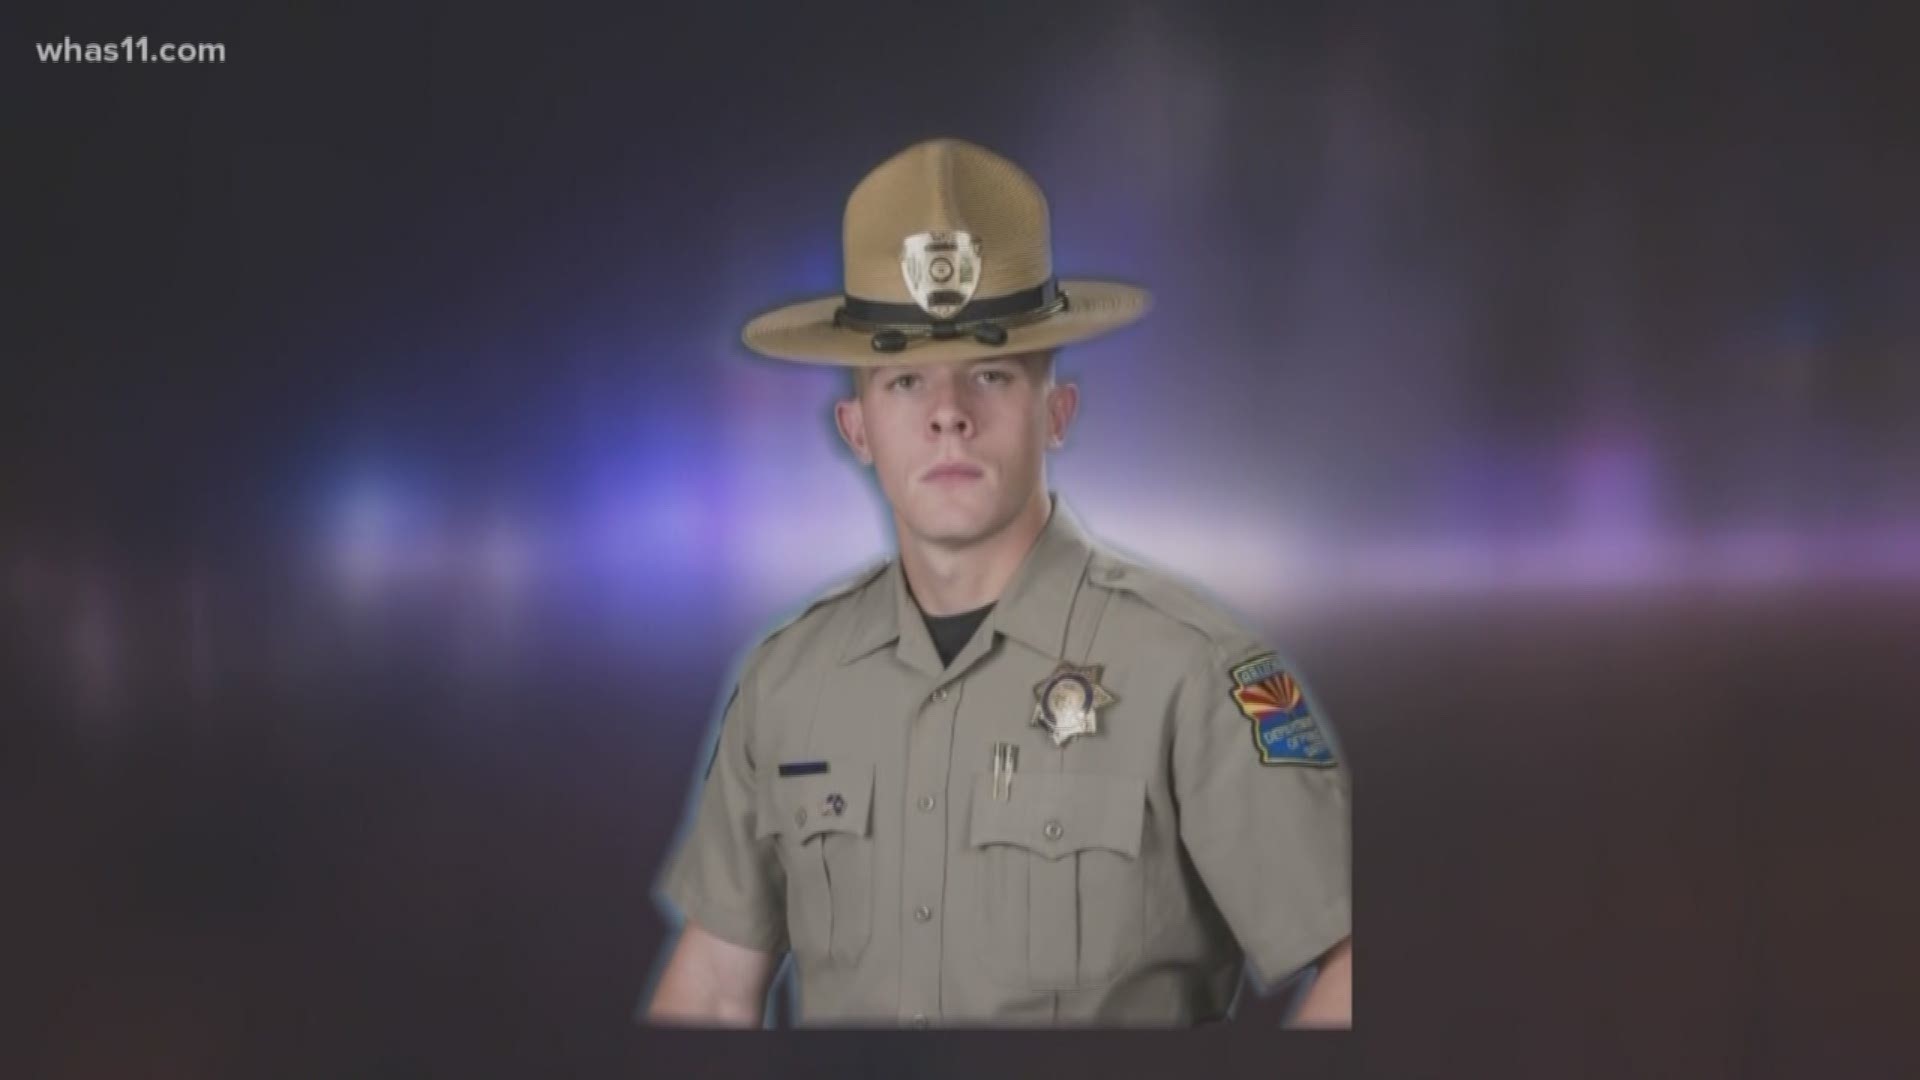 It was a homecoming for a fallen Arizona state trooper. His family and friends gathered for a dedication ceremony in his hometown of Jeffersontown.